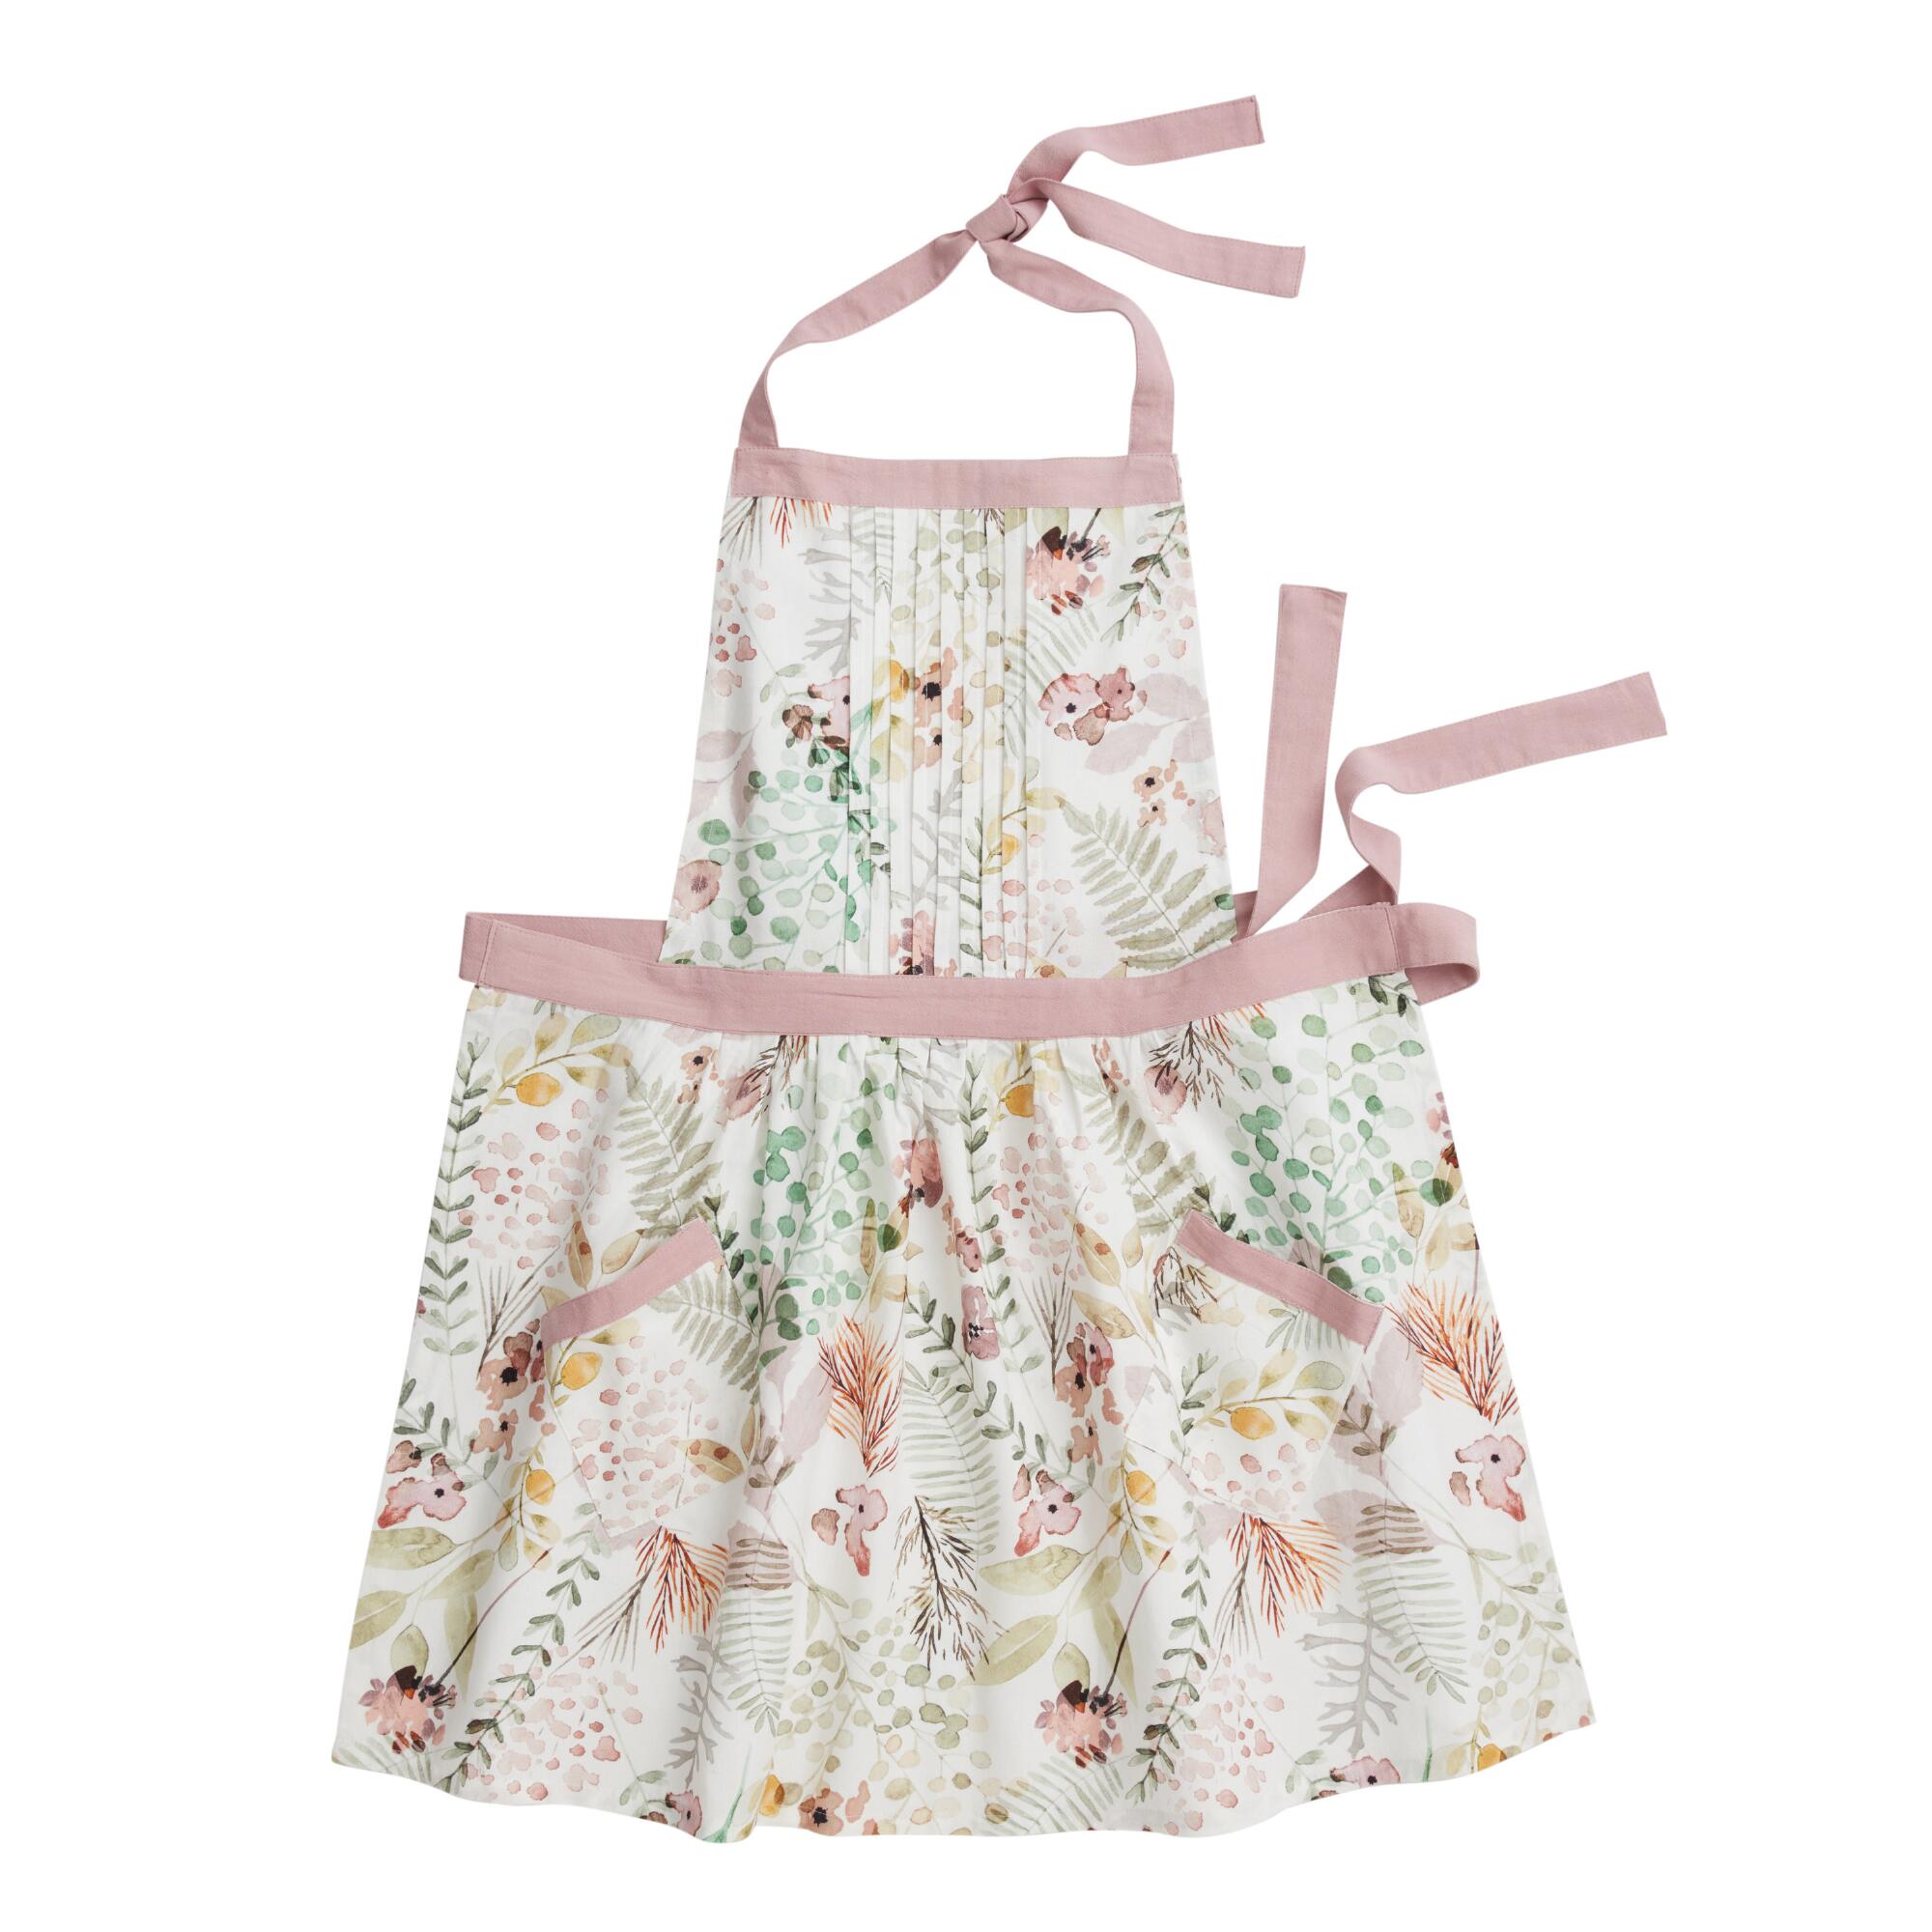 Green And Pink Fern Print Apron by World Market